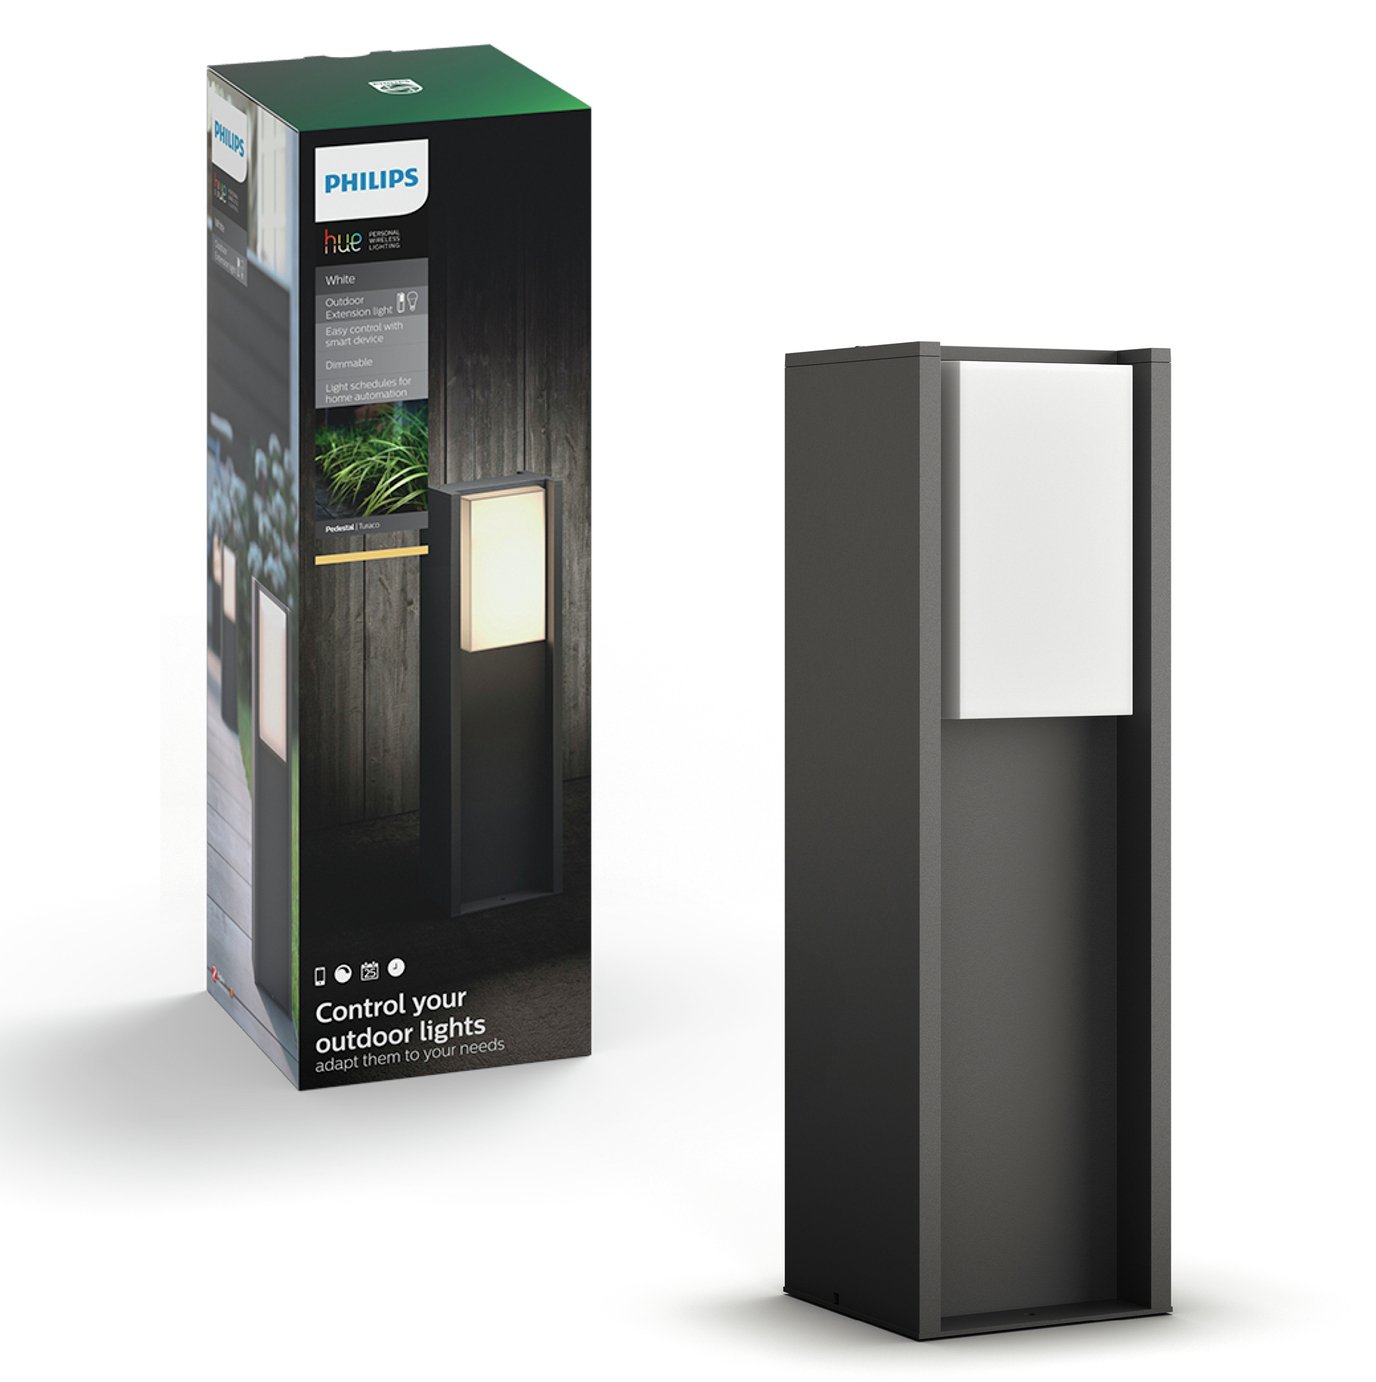 Philips Hue Turaco Outdoor Pedestal Light Review